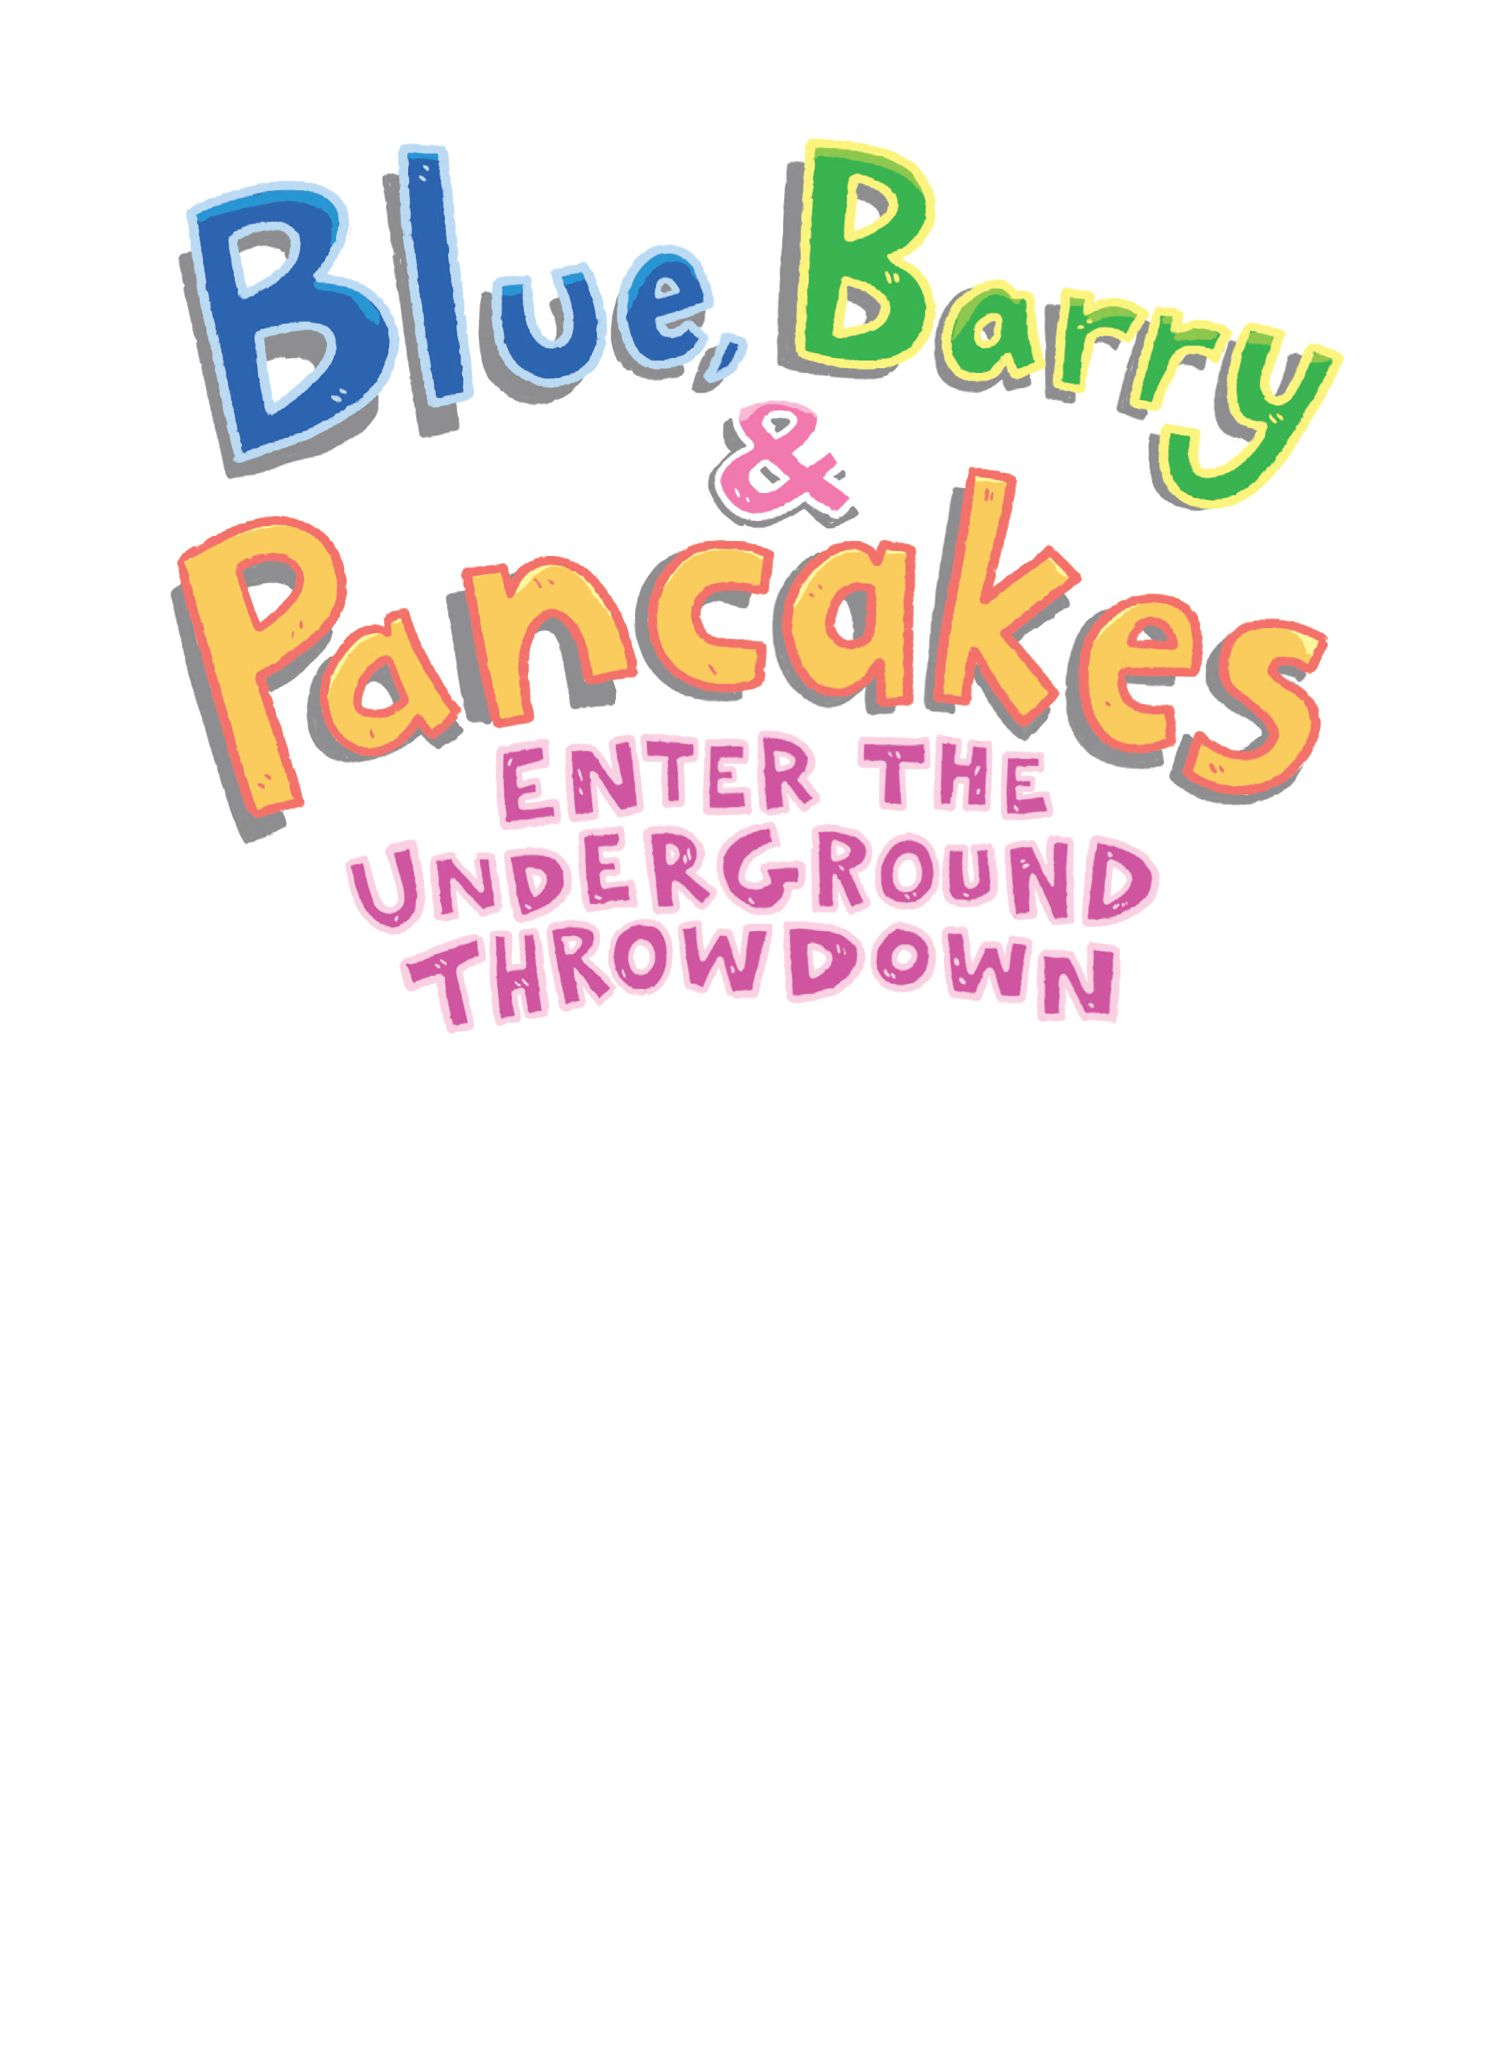 Read online Blue, Barry & Pancakes comic -  Issue # TPB 4 - 3